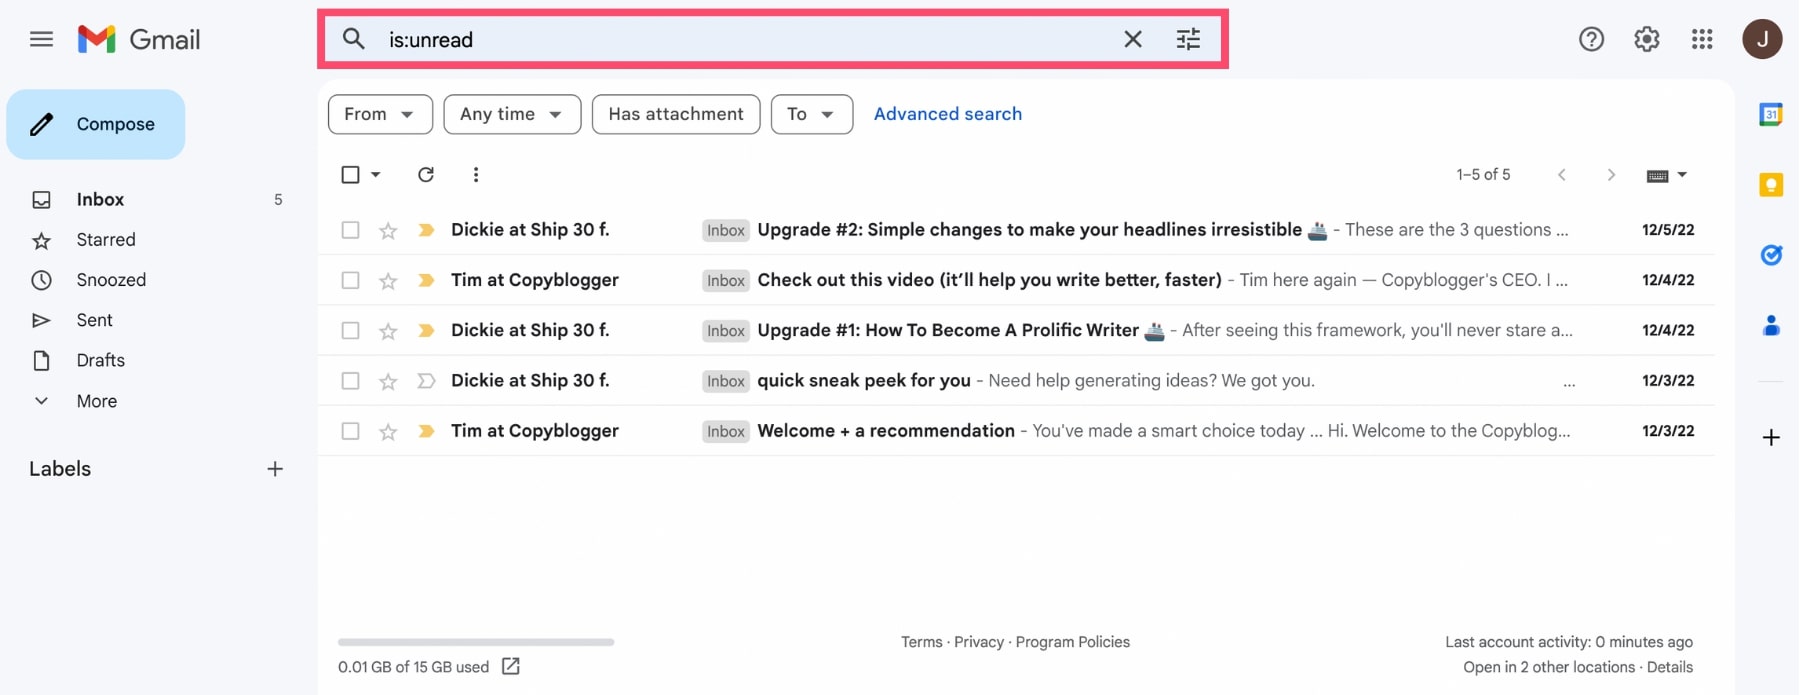 How to search for unread messages in Gmail